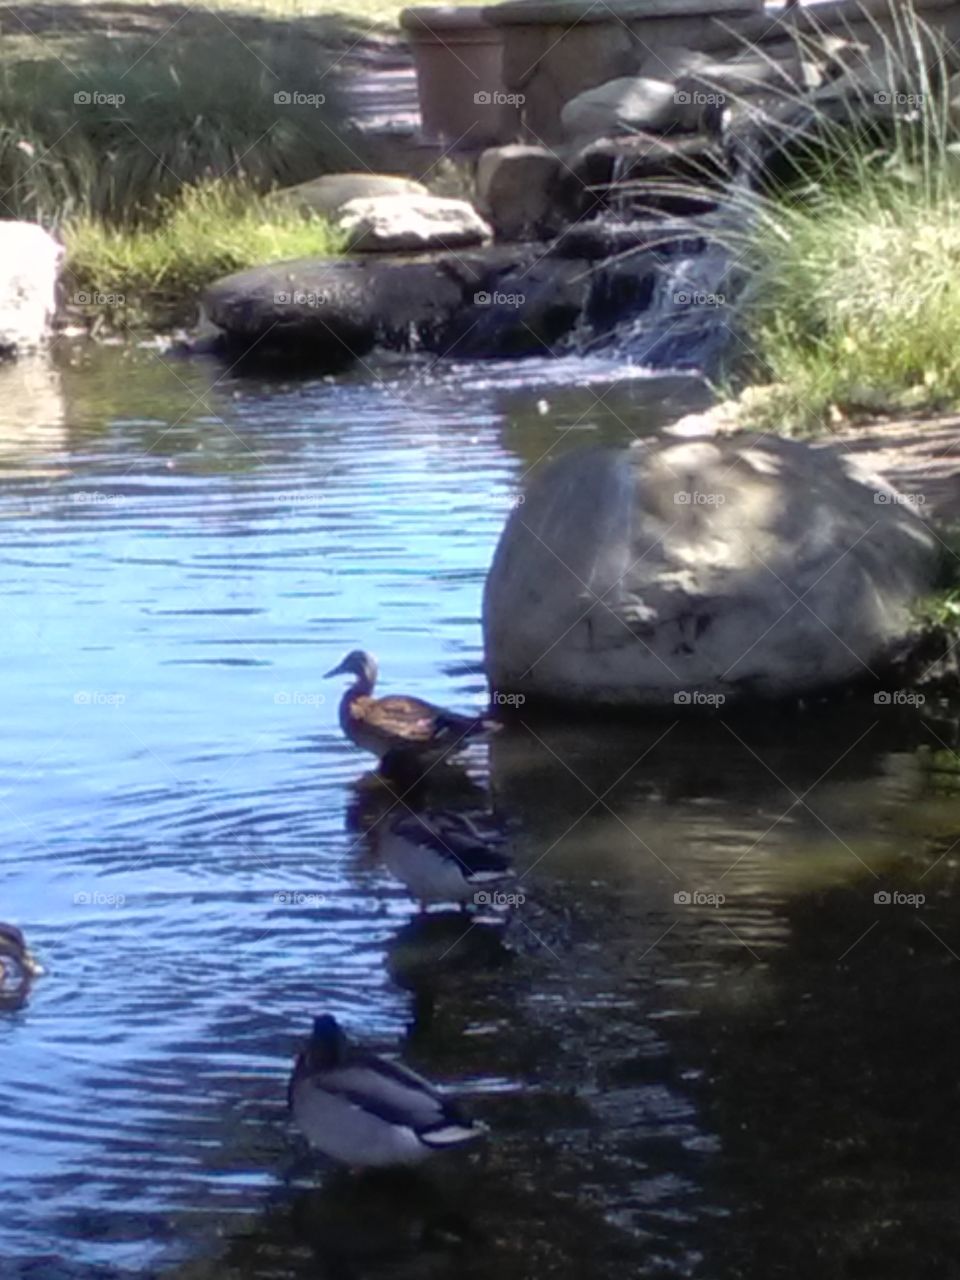 Ducks are relaxing before the day starts :)